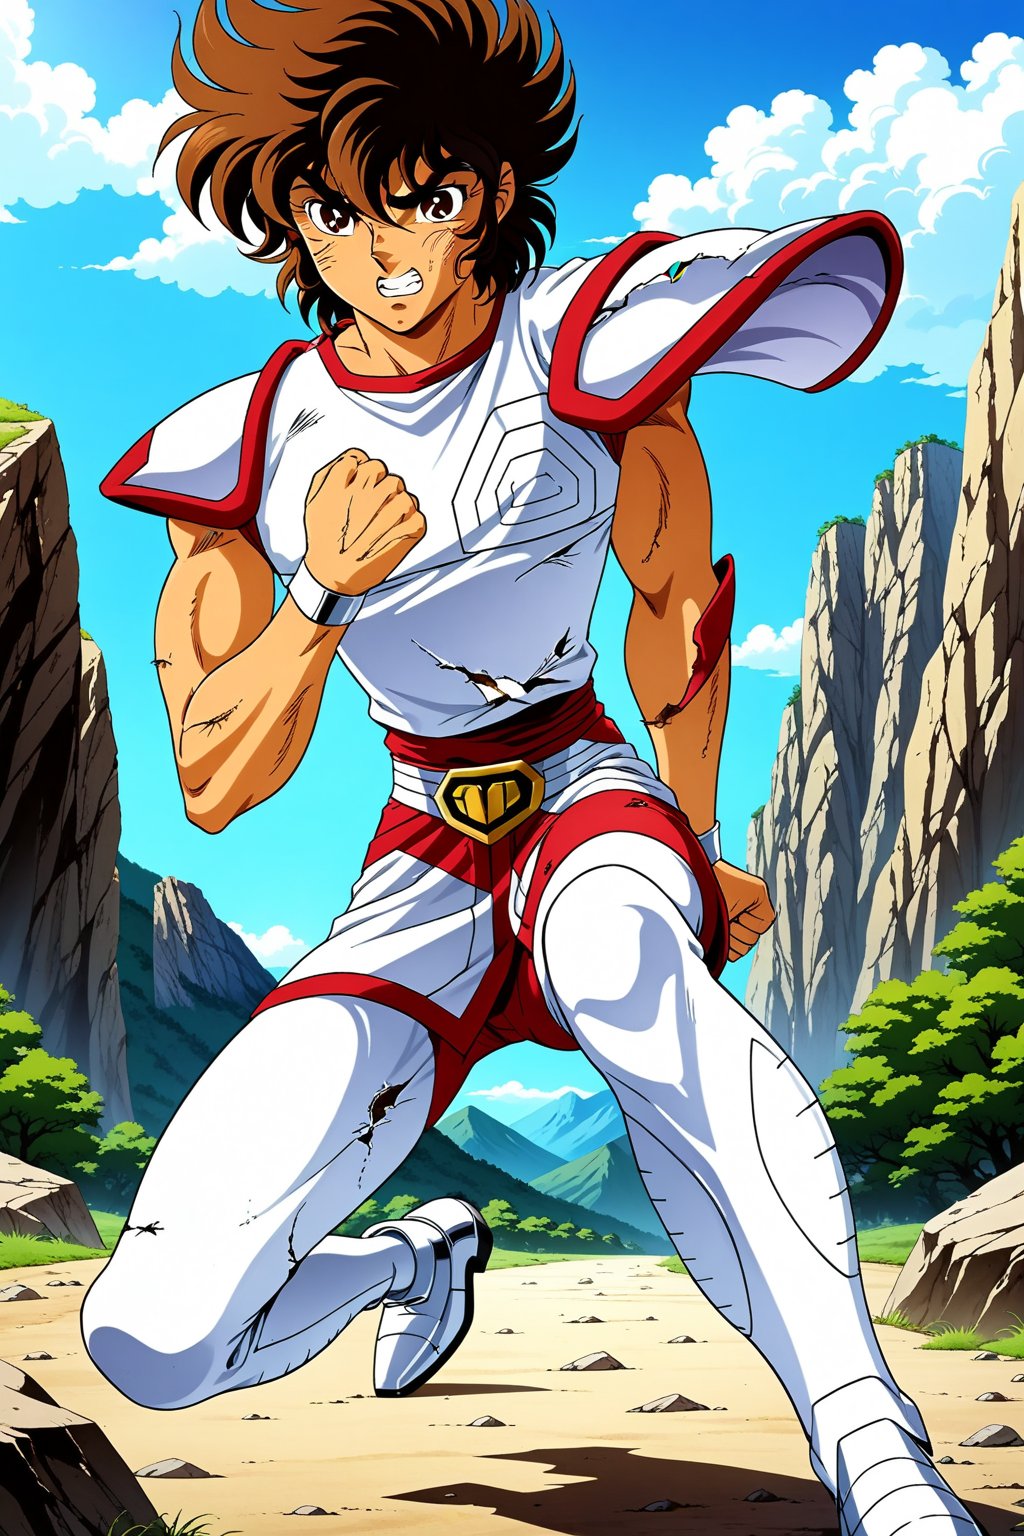 (masterpiece, best quality, ultra HD anime quality, super high resolution, 1980s/(style), retro, anatomically accurate, perfect anatomy), (front, bottom angle), looking at the camera, (Seiya Pegasus, male, (Pegasus cloth, slightly damaged)), 1 male, solo, brown hair, short hair, bangs between eyes, messy hair, brown eyes, angry face, scratch on cheek), heavy breathing, excited, (red underwear, tattered, red underwear pants, tattered), (fighting stance, standing stance, low stance, legs wide apart, one foot forward), (mountain scenery, mountain path, barren land, large rocks, cliff), score_9, score_8_up, score_7_up, score_6_up,Seiya Pegasus,Anime, score_9_up